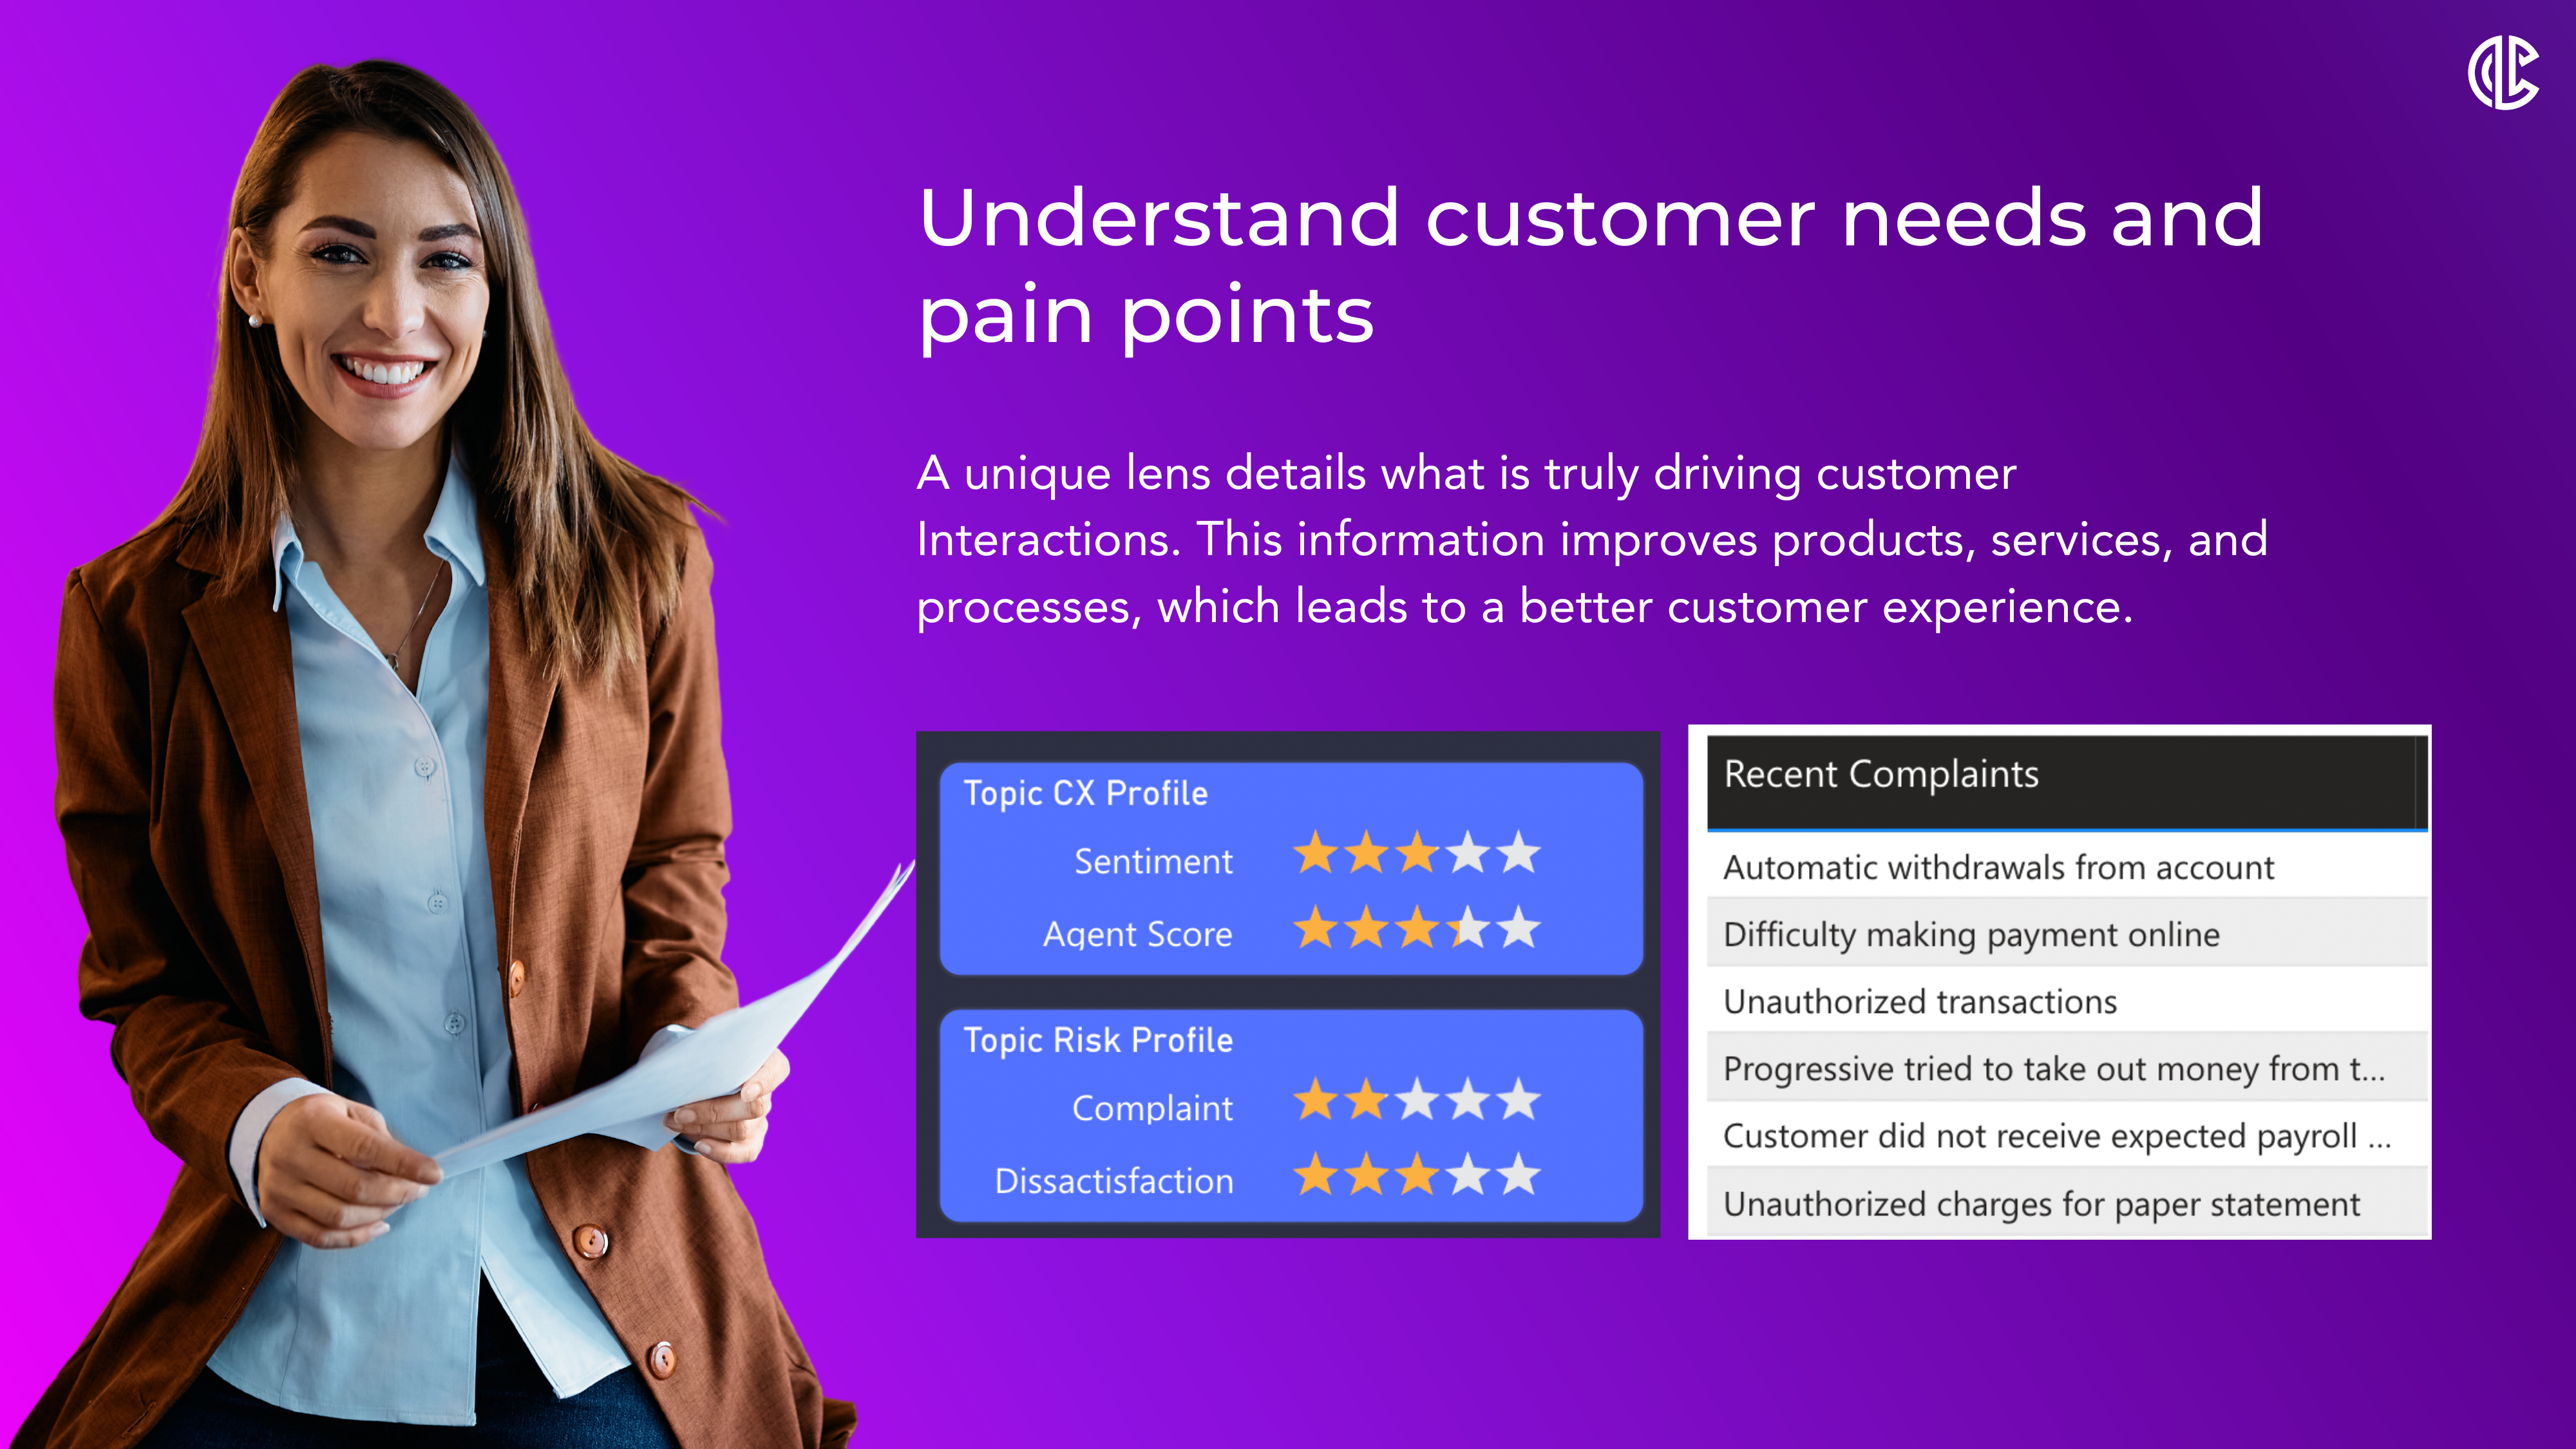 Solve customer pain points. Understanding customer needs and pain points helps businesses optimize their processes to provide a better customer experience. This increases customer loyalty and repeat business, increasing productivity and revenue.